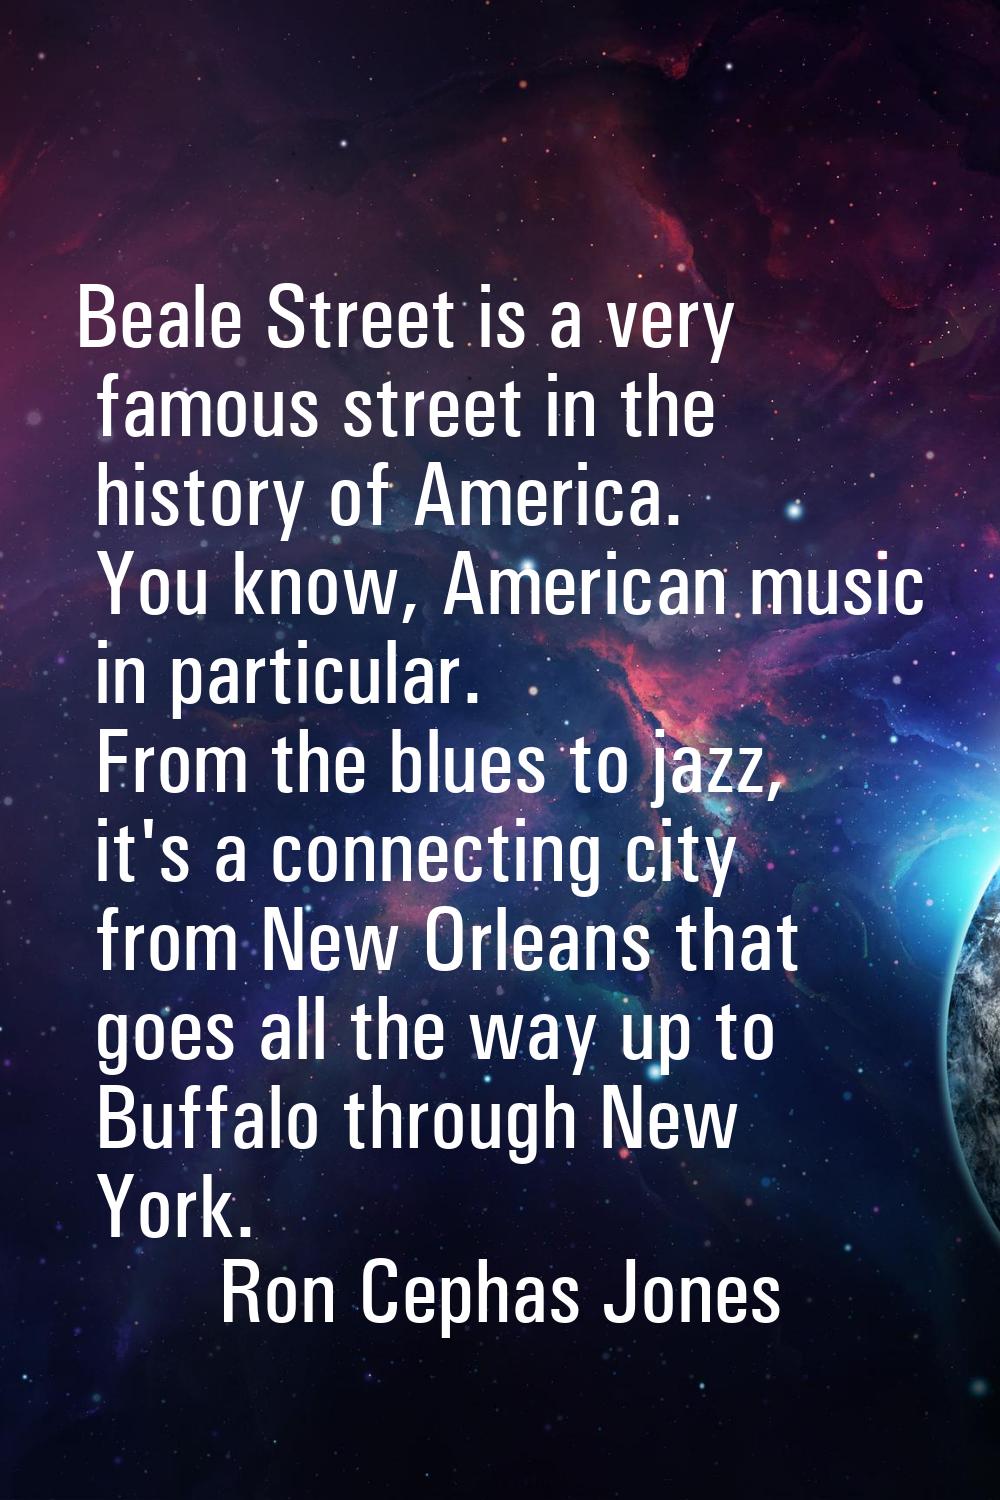 Beale Street is a very famous street in the history of America. You know, American music in particu